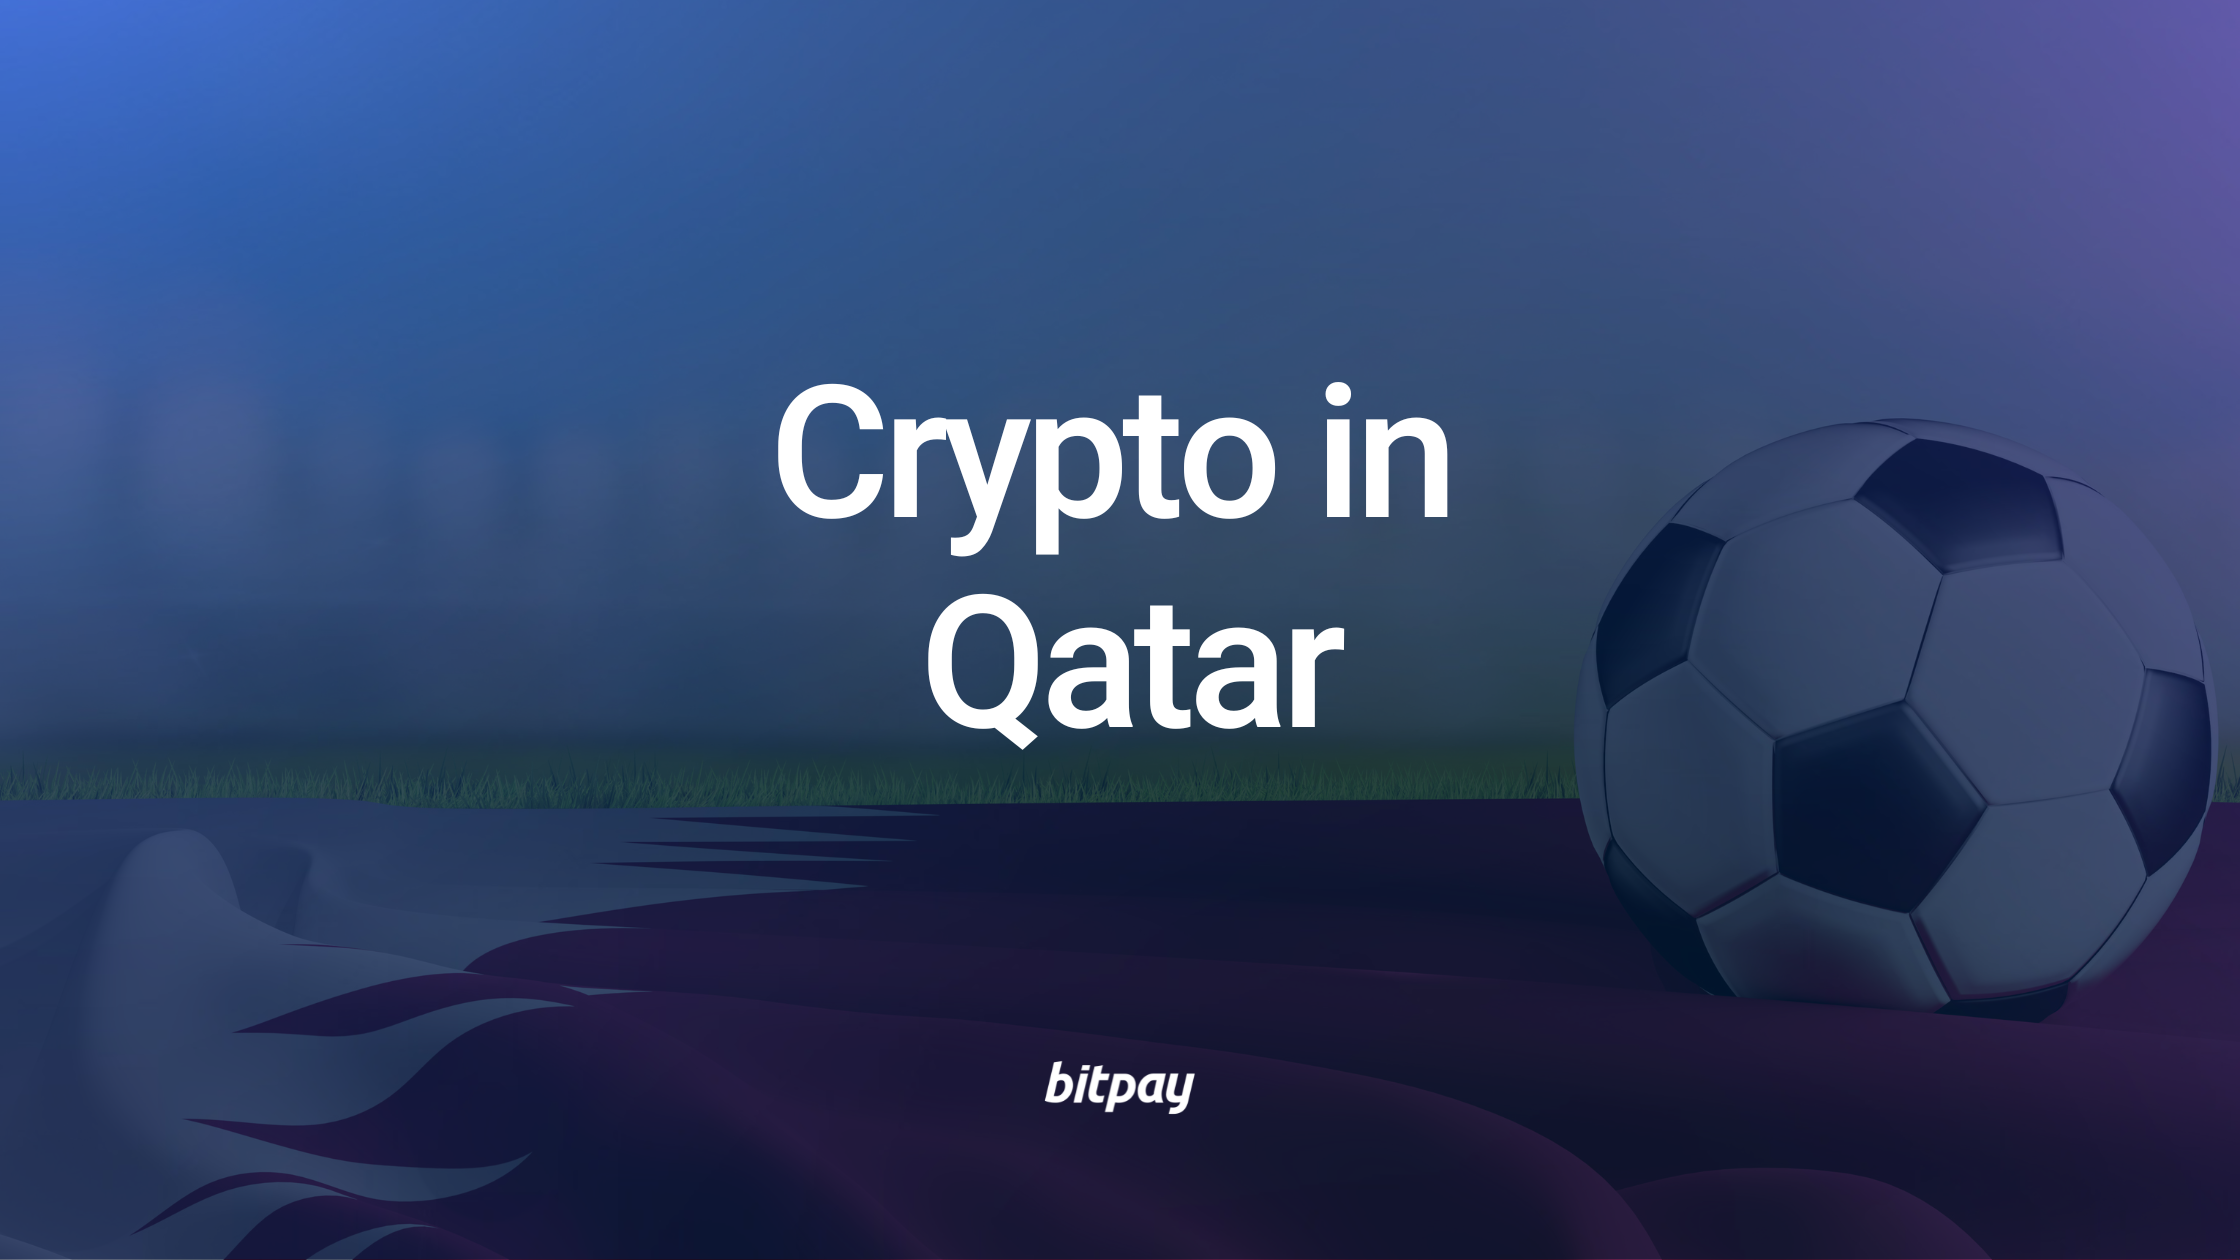 Headed to the World Cup? Here's What to Know About Crypto in Qatar.